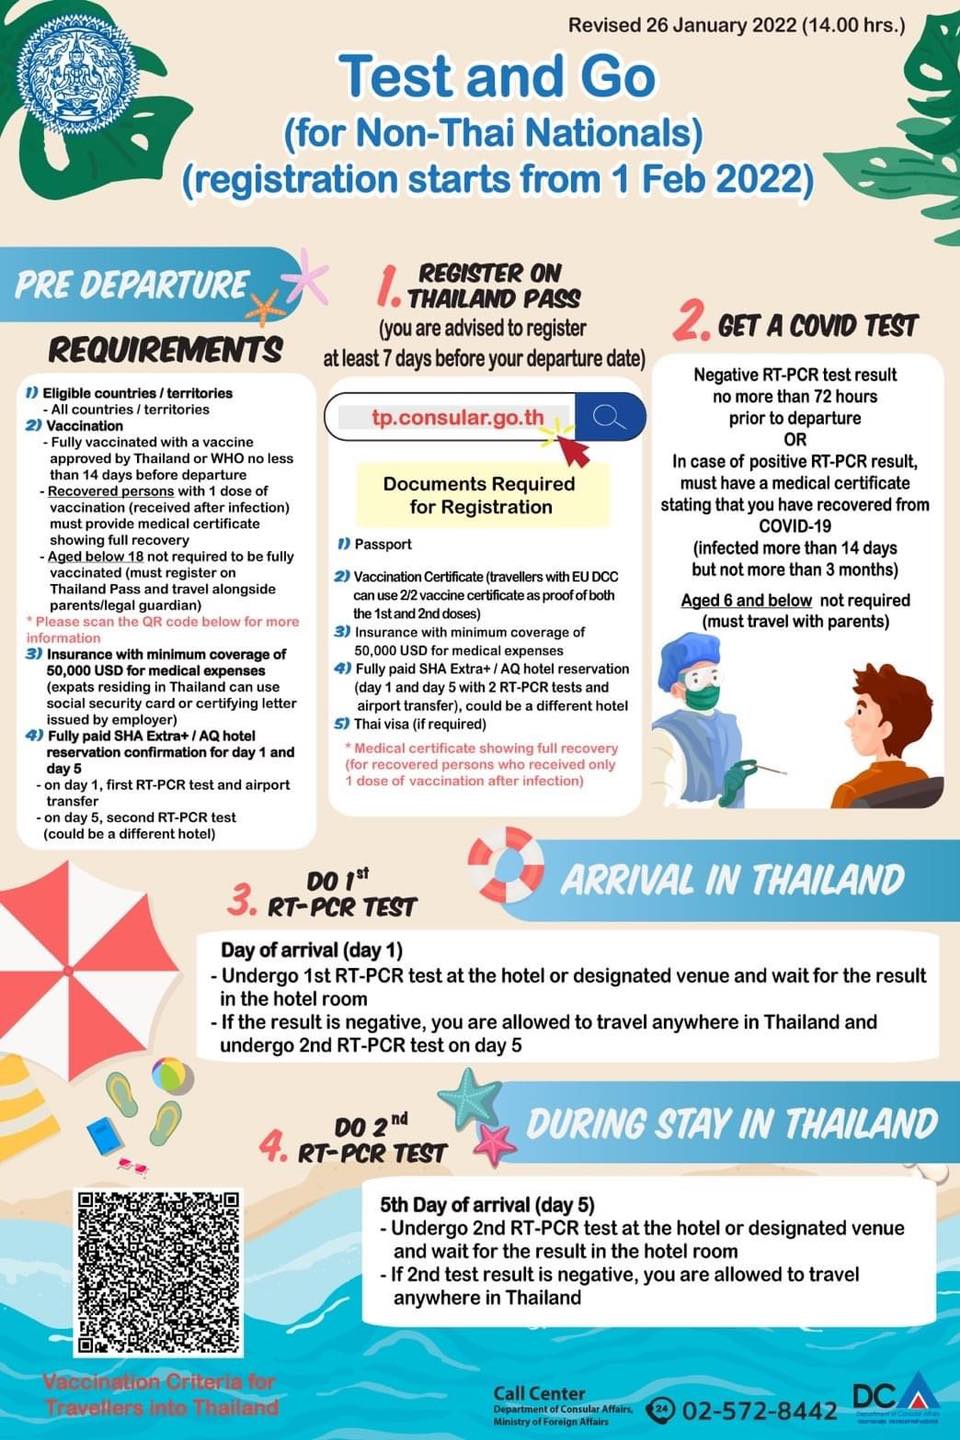 t-07-%E2%80%98Test-and-Go-for-non-Thai-nationals-registration-effective-Feb-1-information.jpg